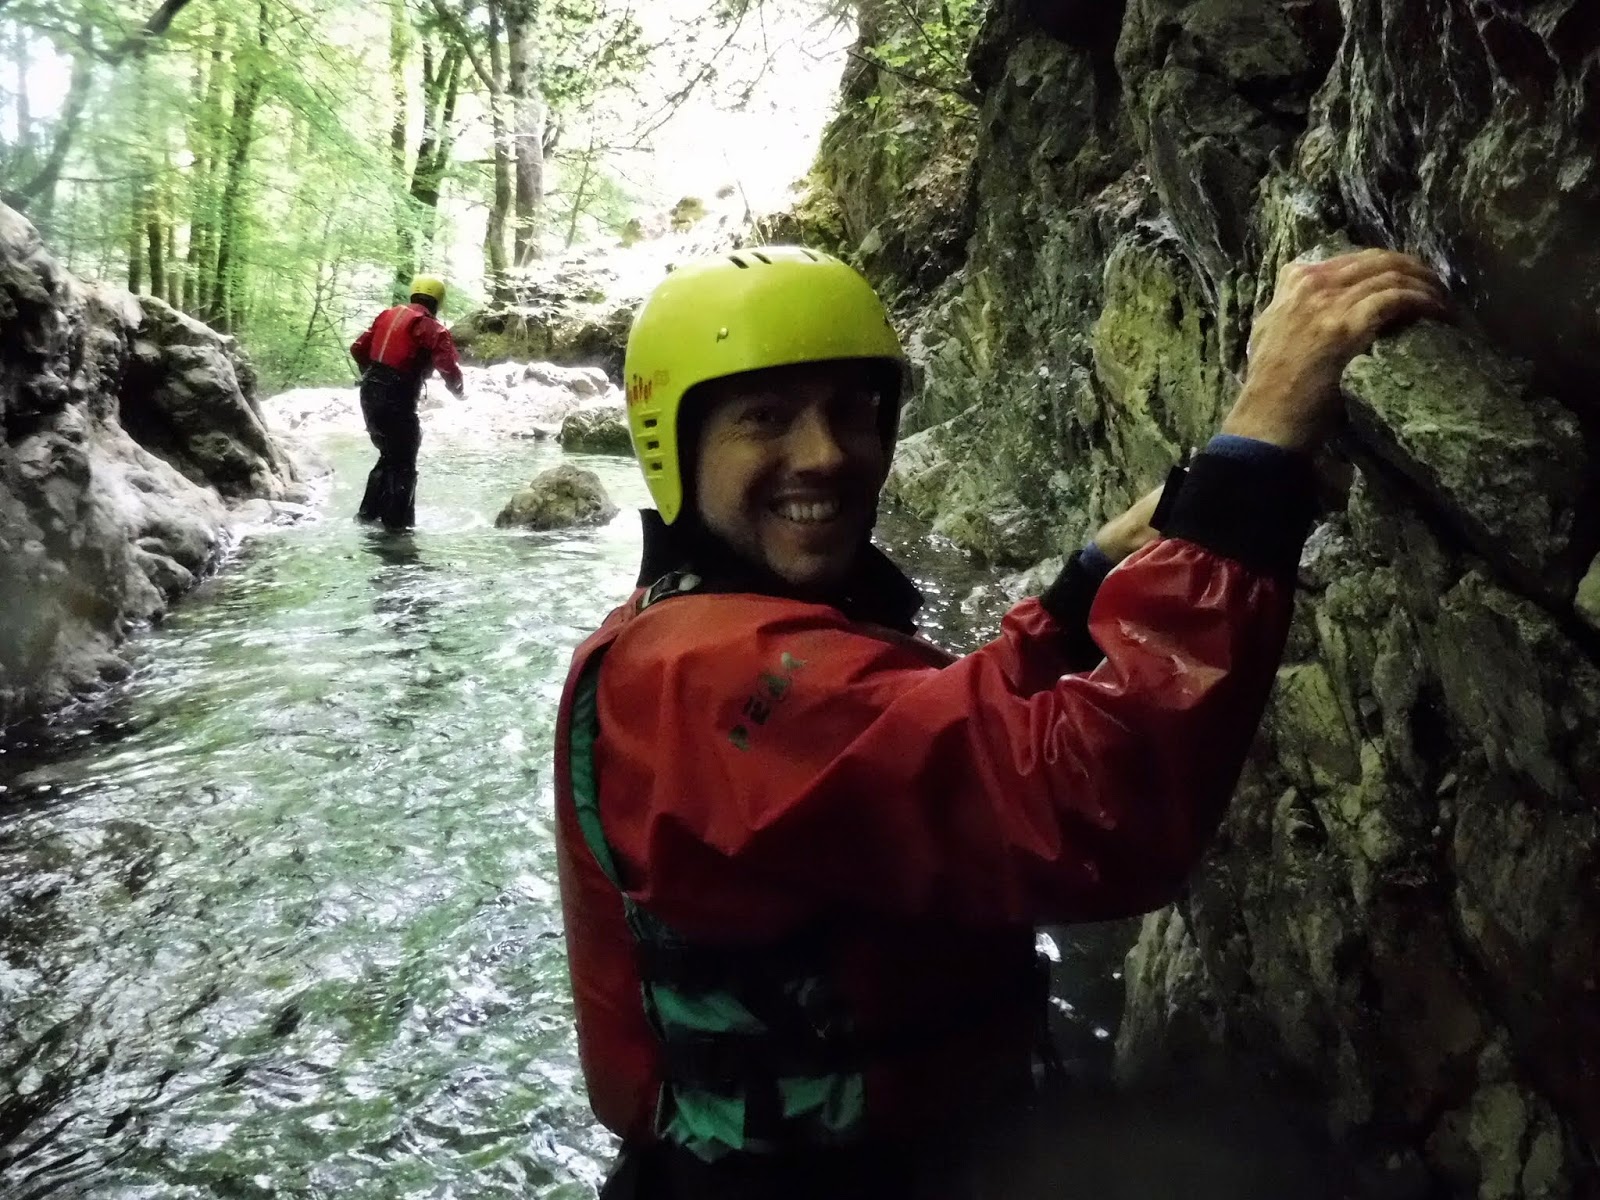 Canyoning & Gorge Scrambling In Coniston - Adventure Bagging